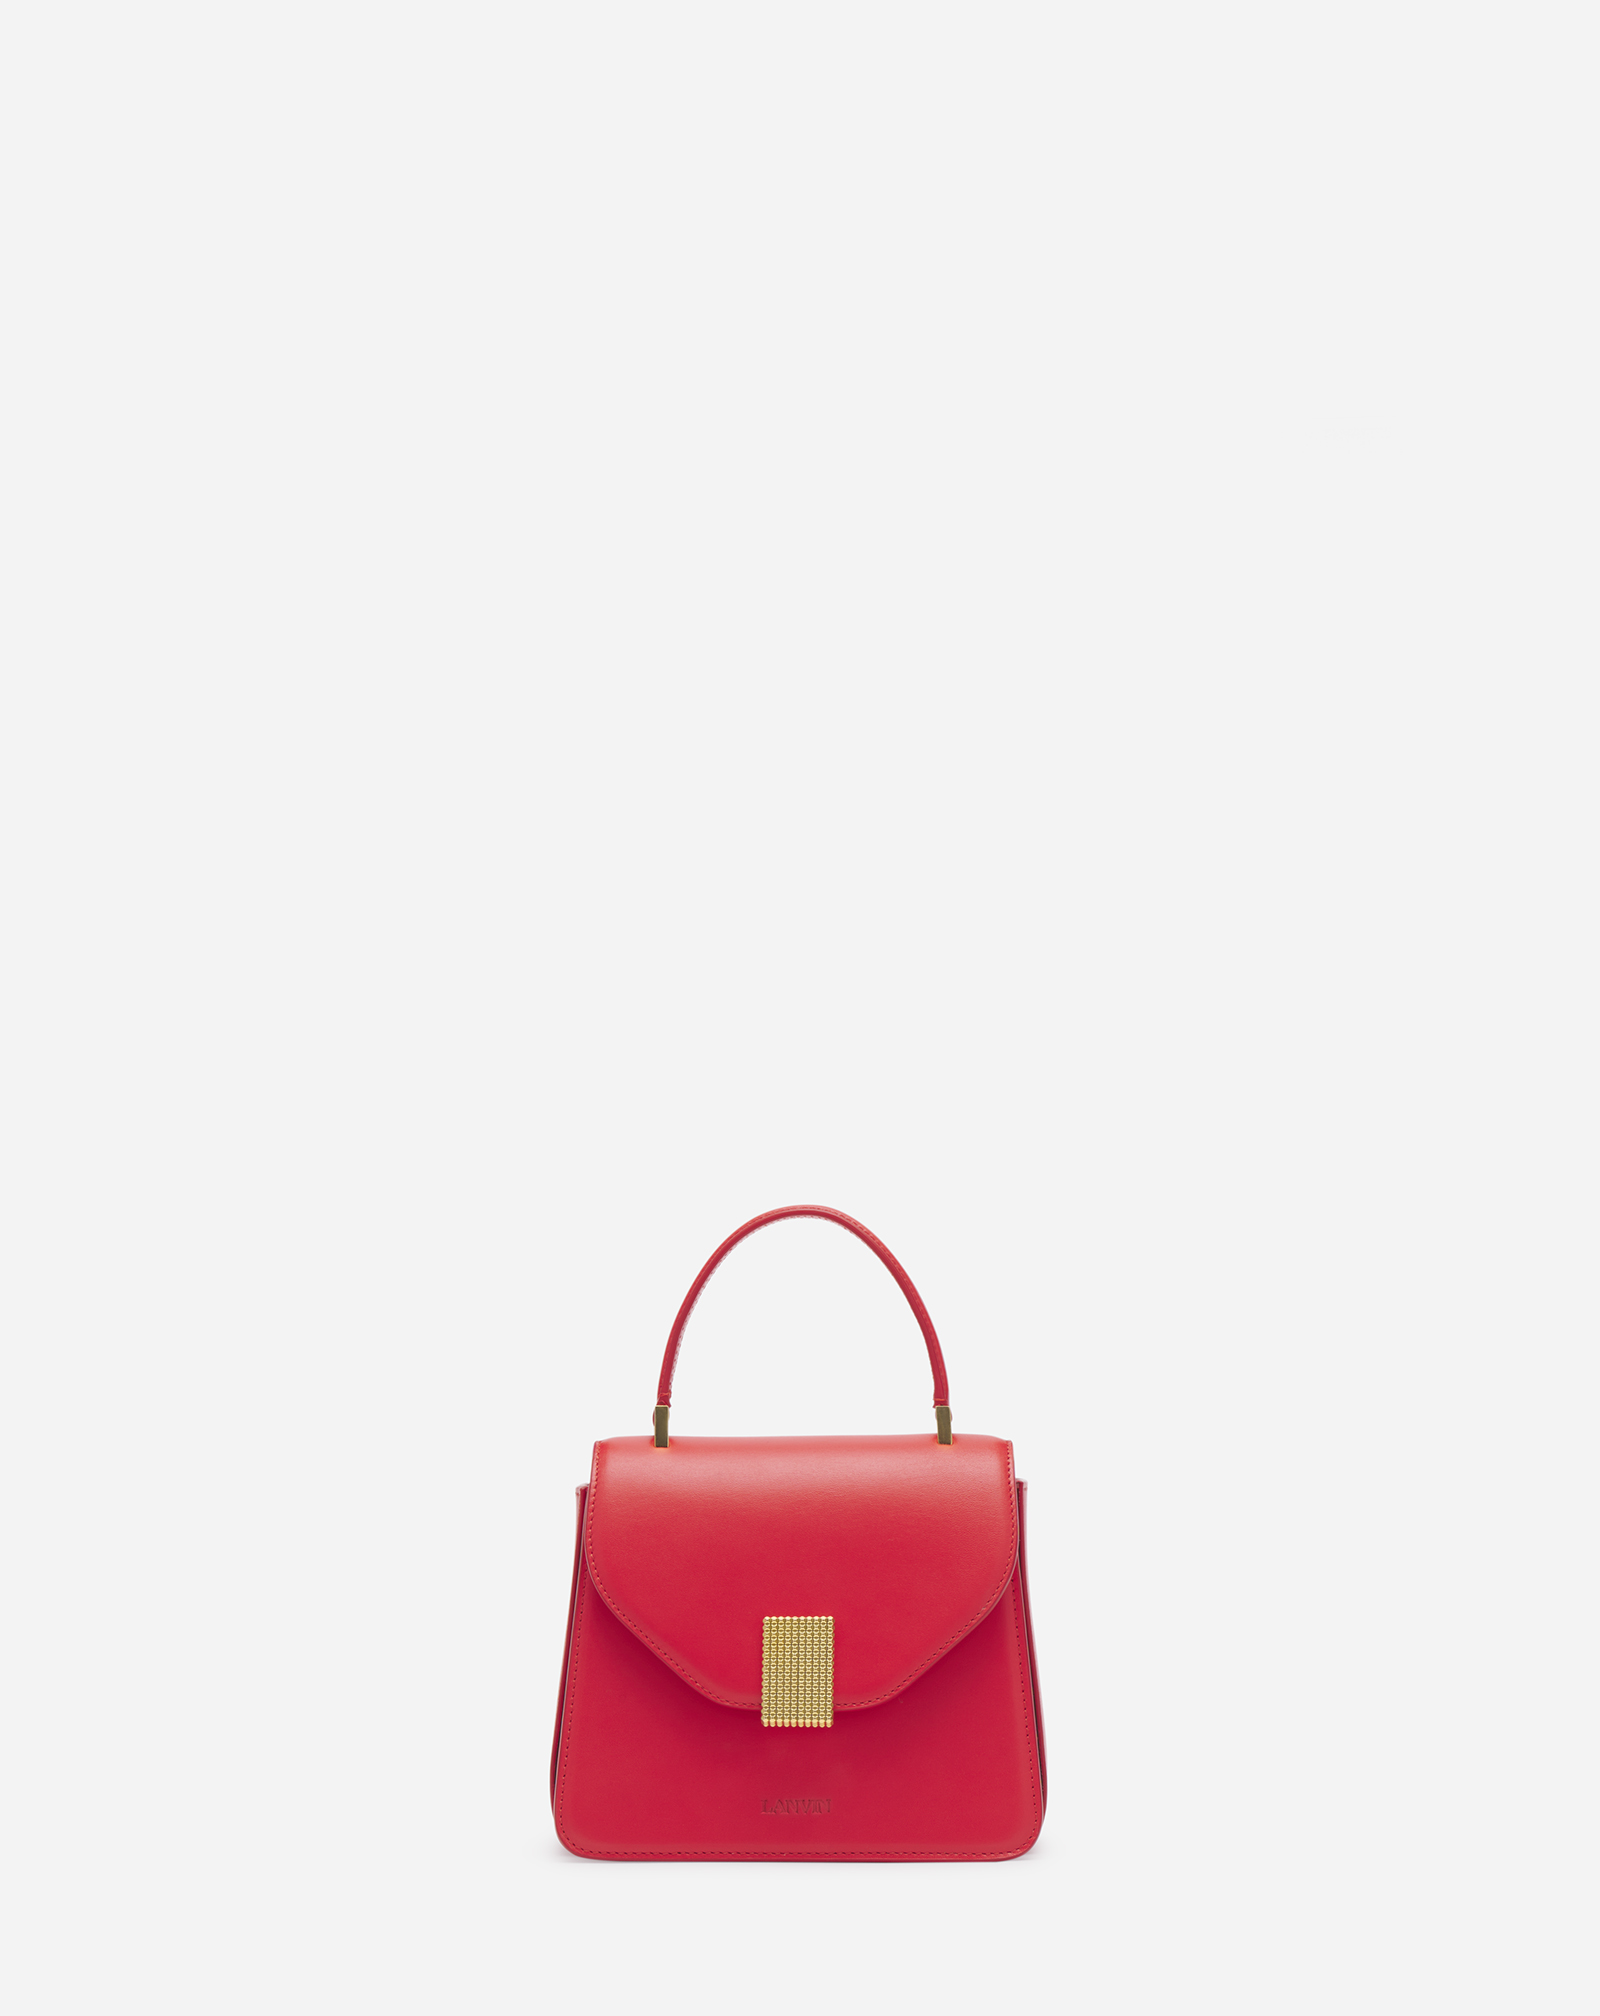 Lanvin Concerto Leather Handbag With Handle For Women In Red